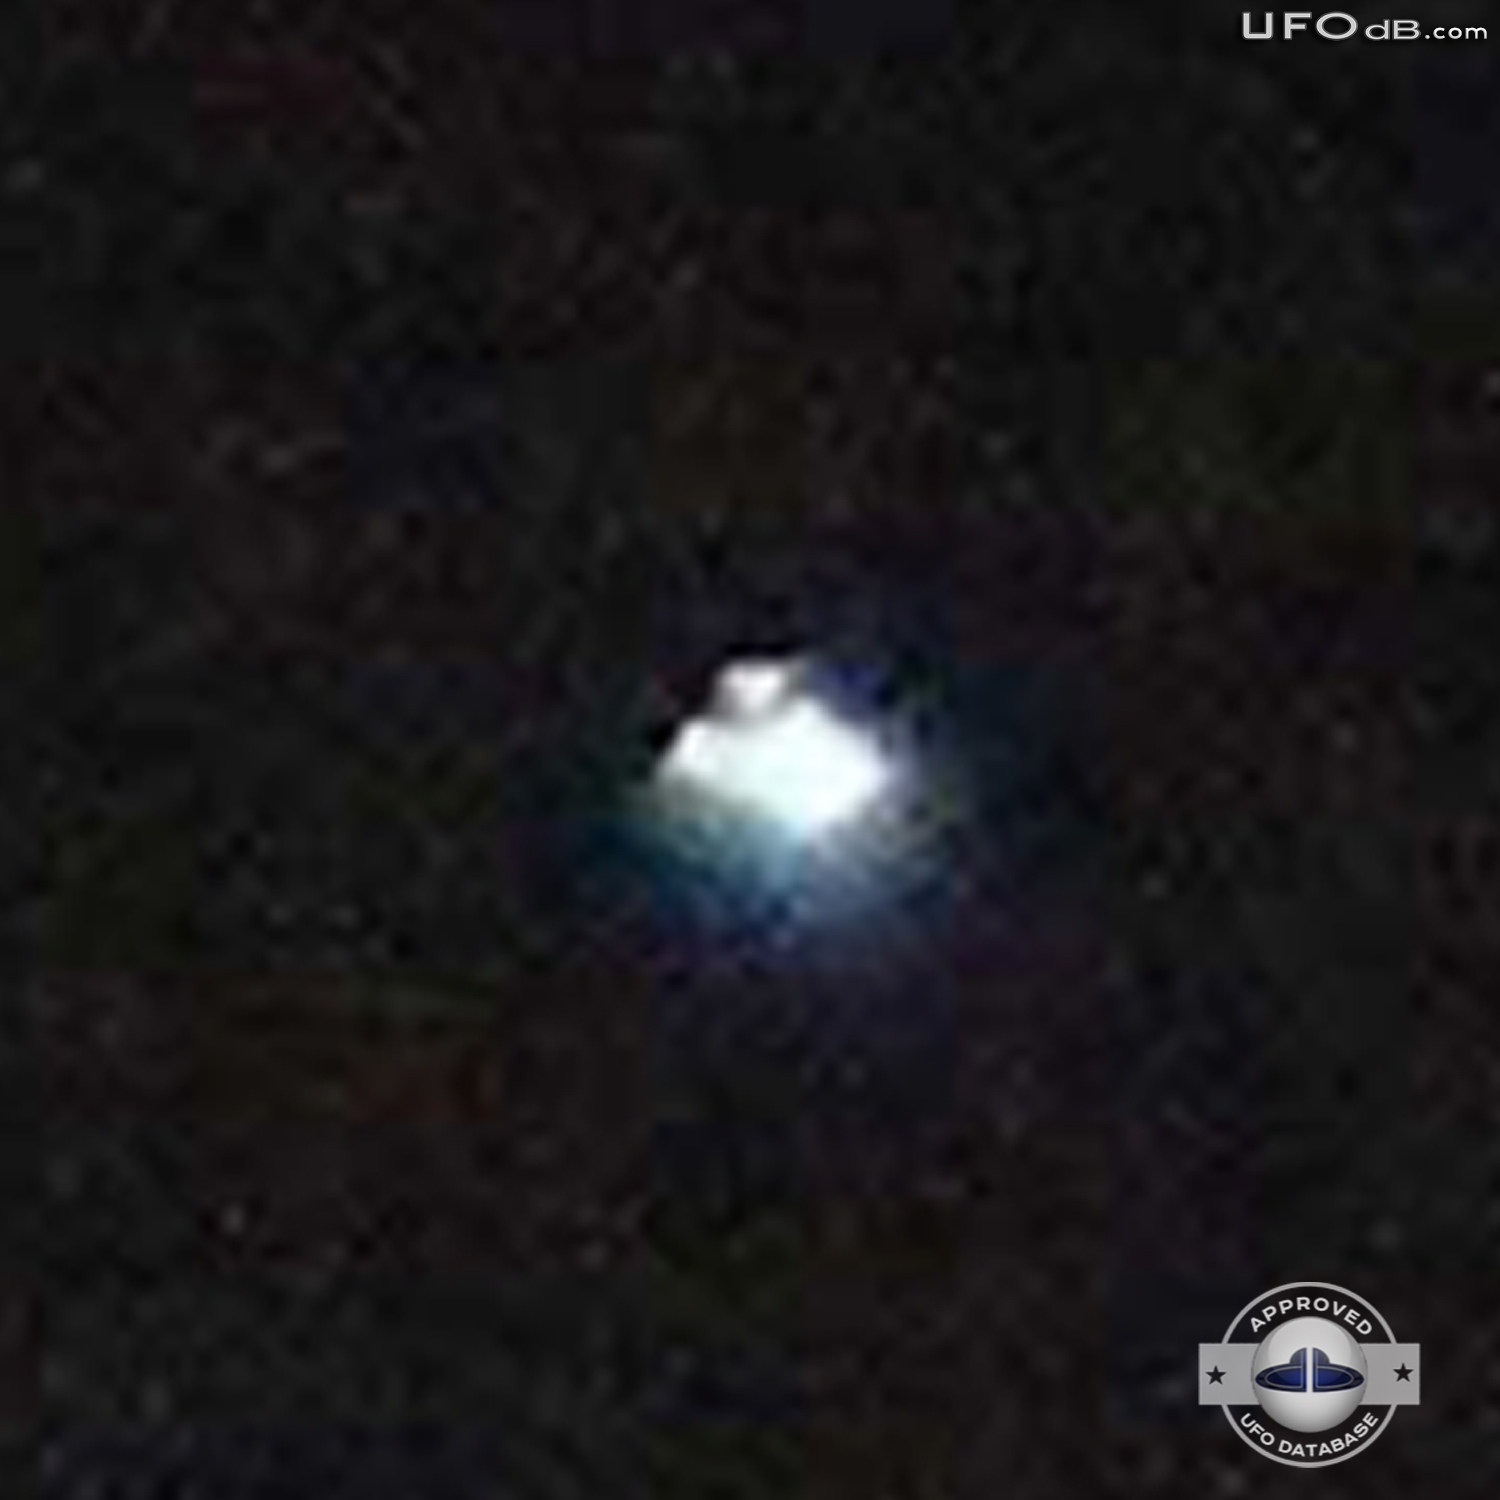 Moon picture captures bright white glowing UFO over a city in Ecuador UFO Picture #352-4